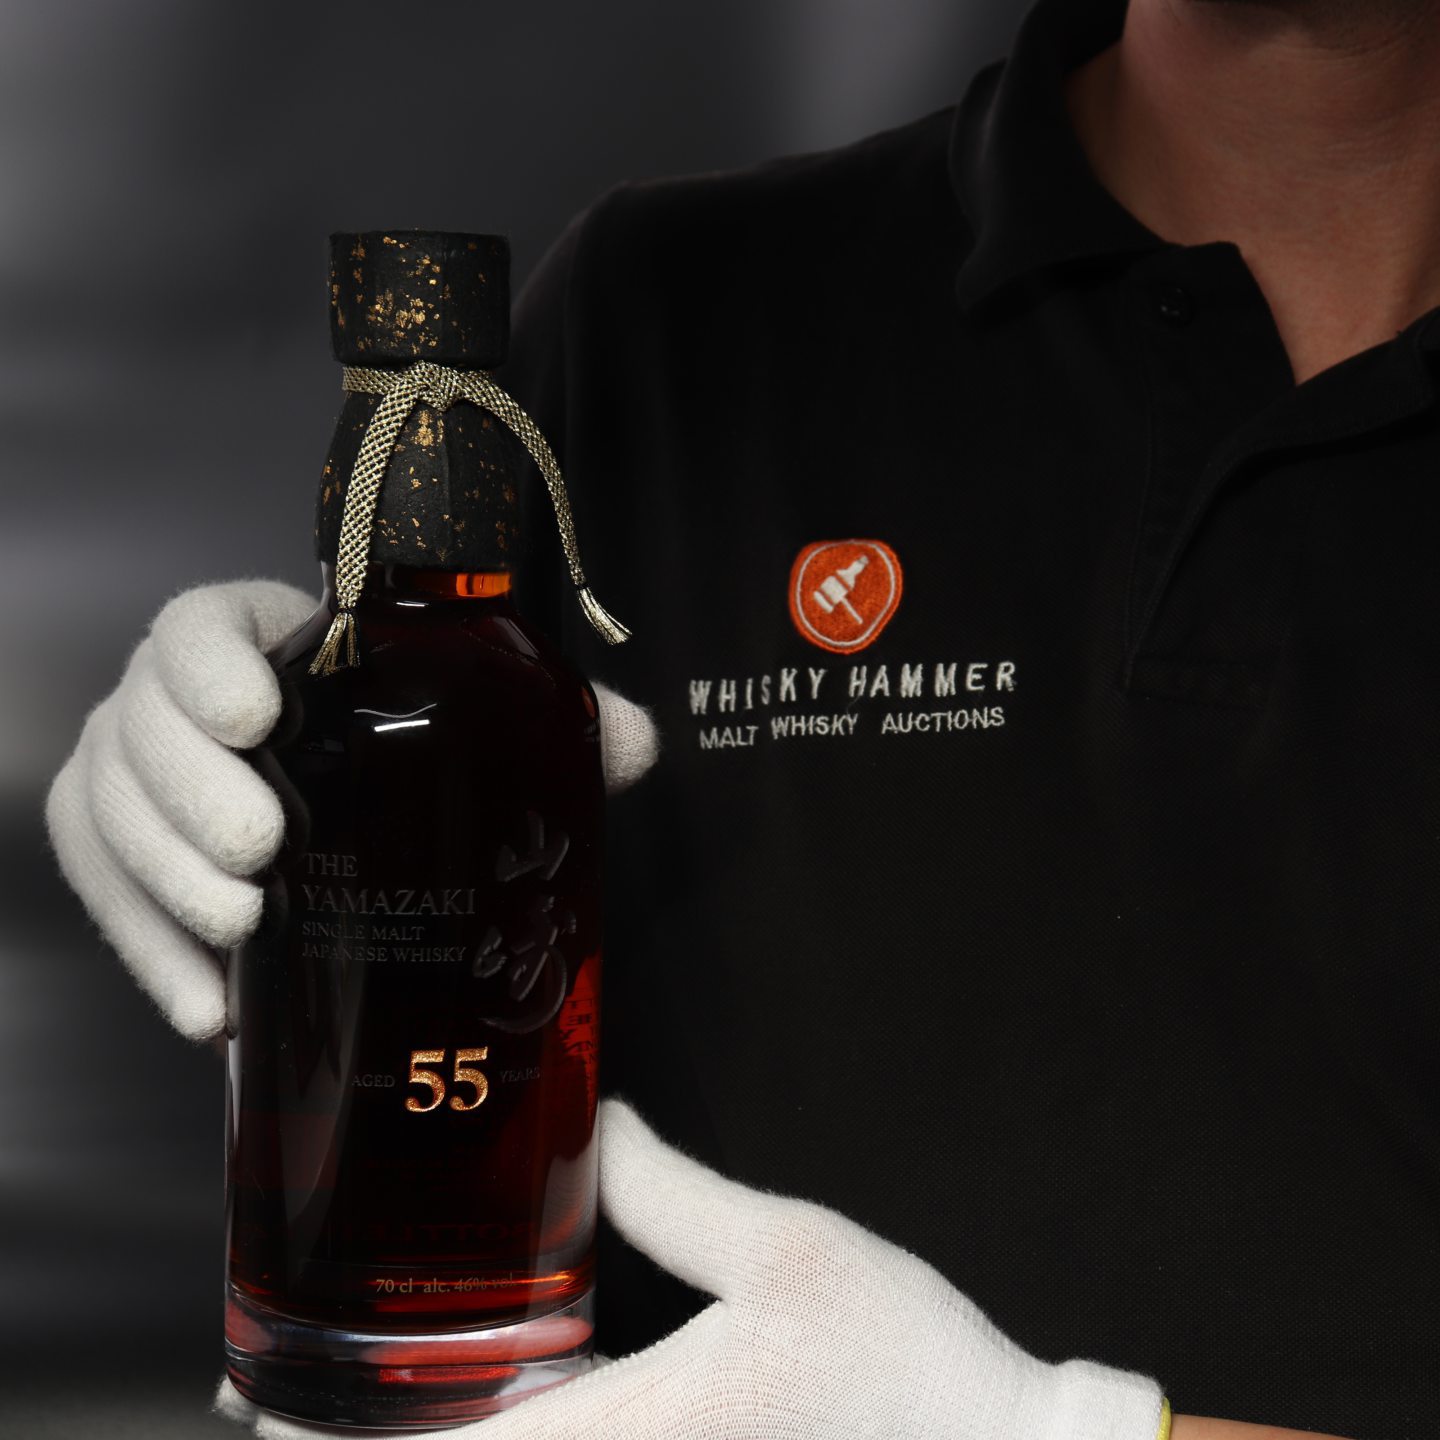 Whisky Hammer sold this 55-year-old-Yamazaki for £380,000. 